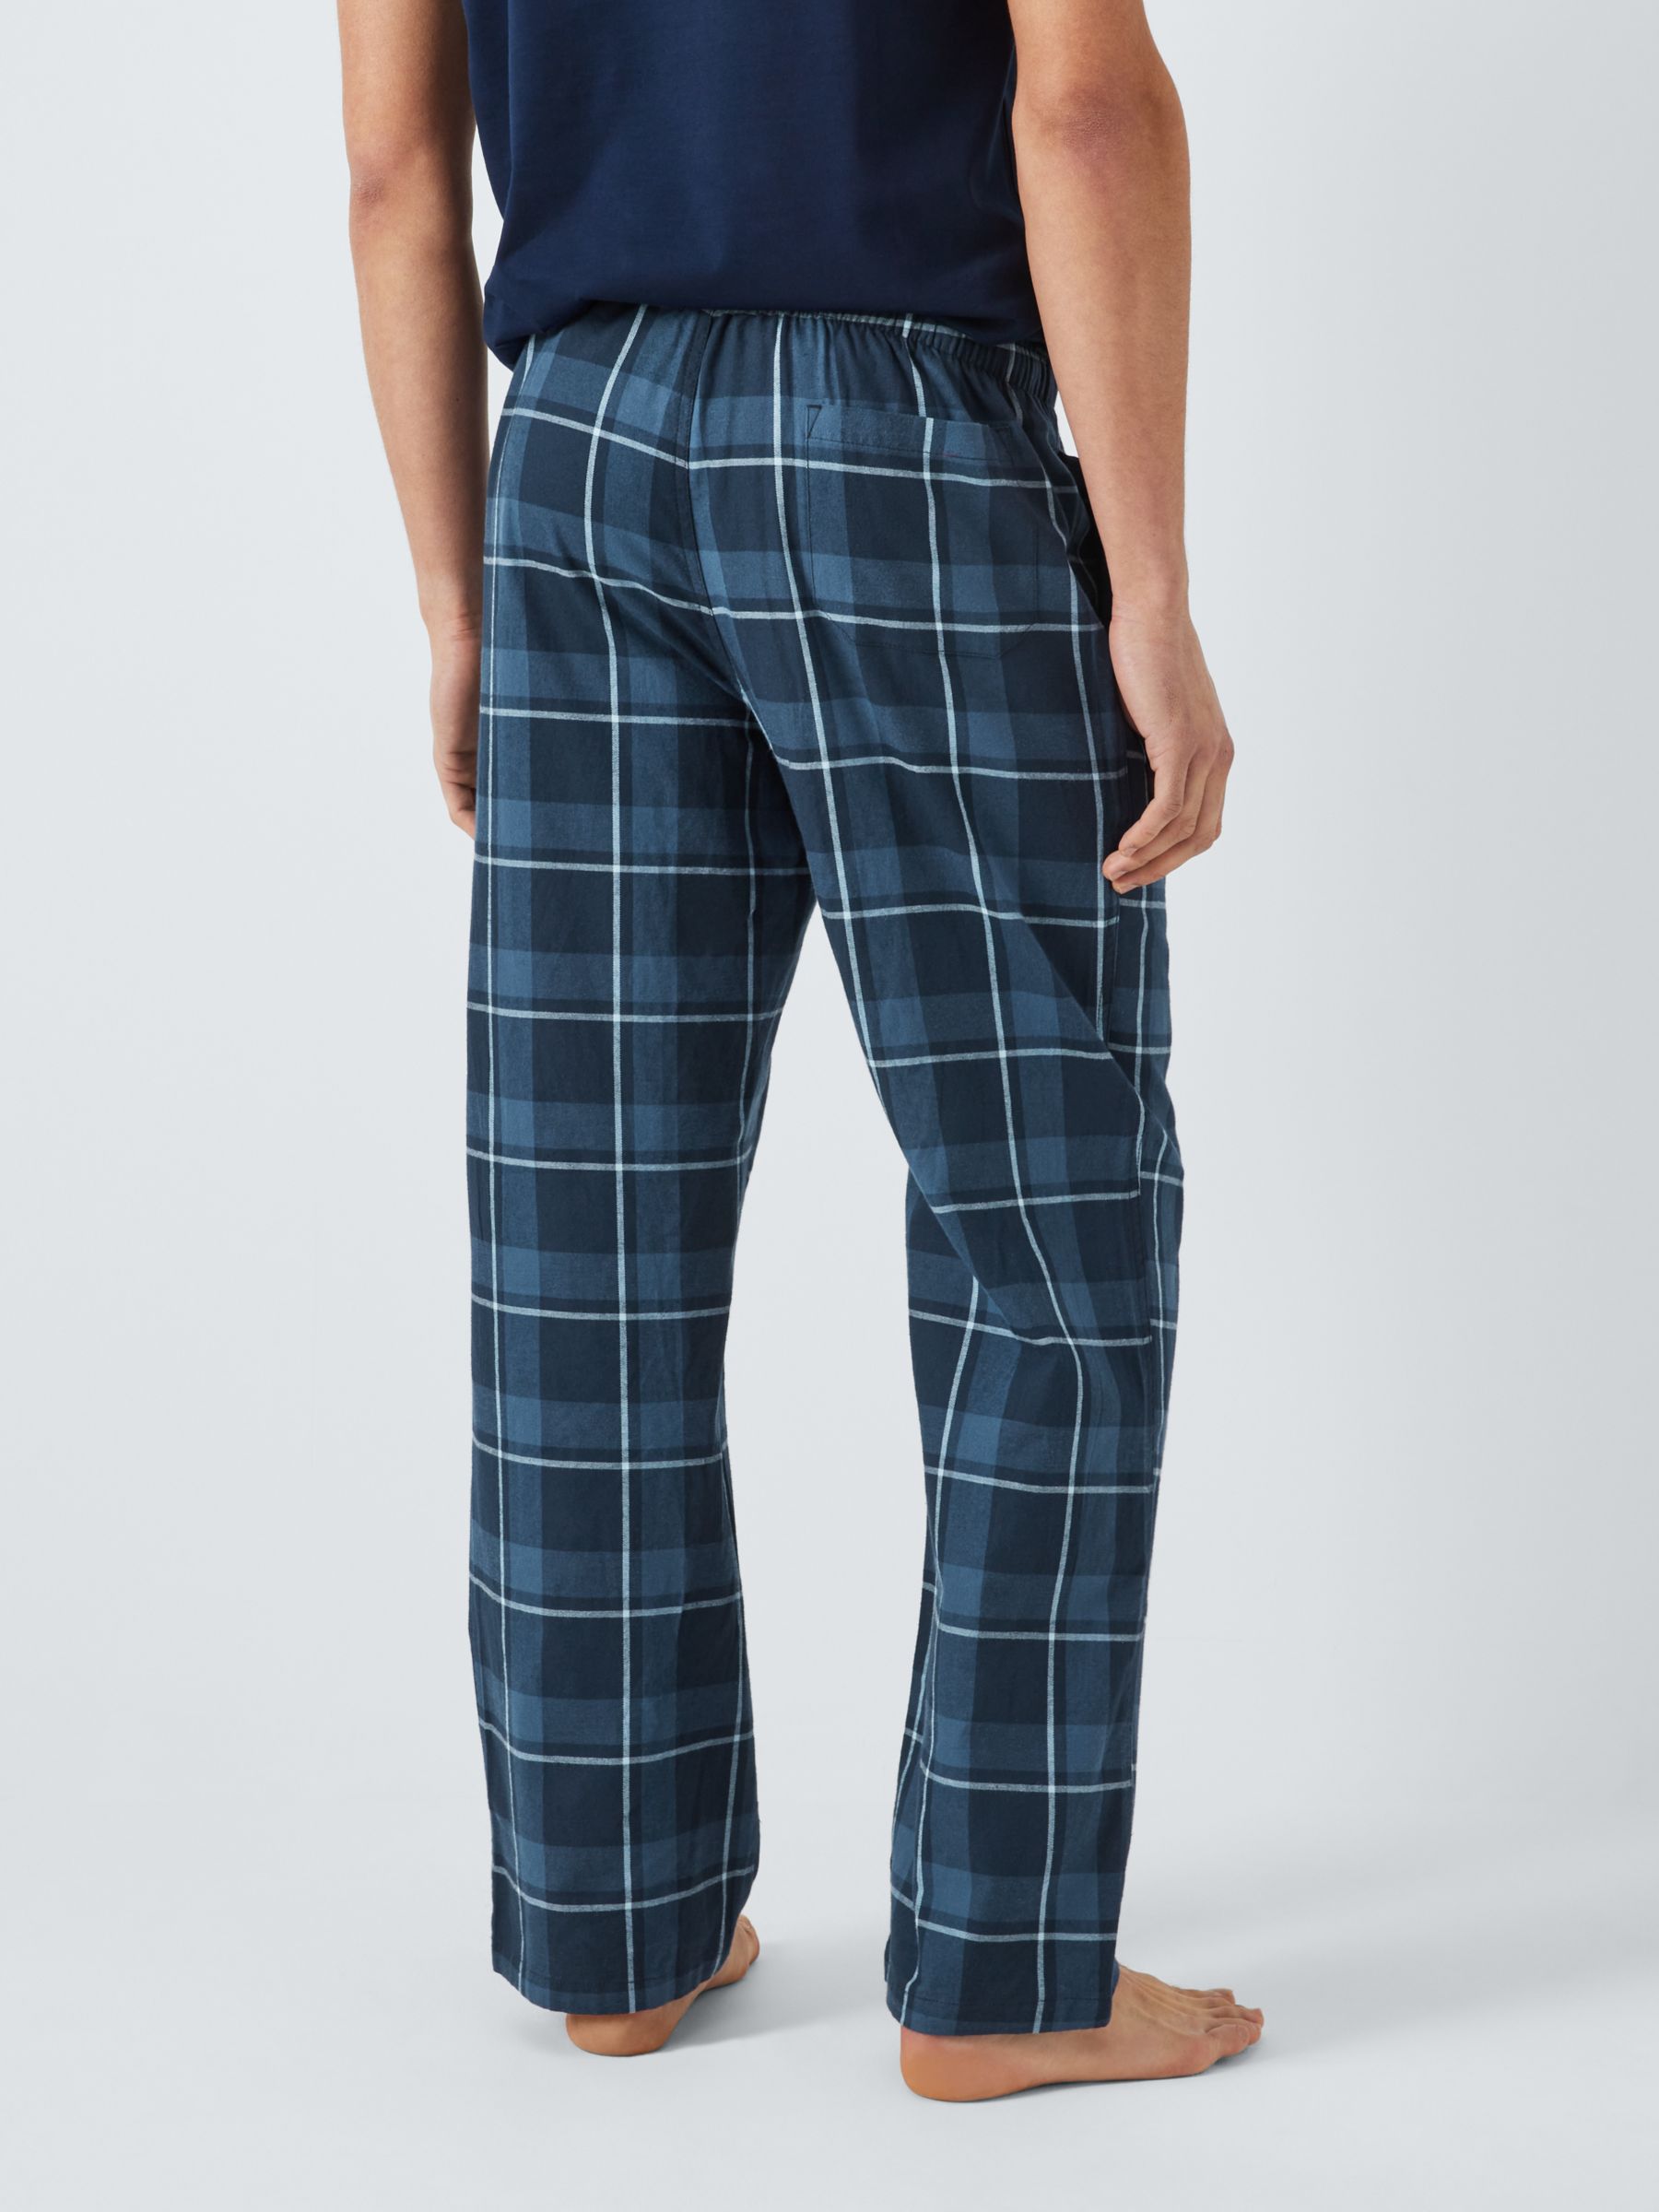 Essentials Men's Straight-Fit Woven Pajama Pant, Navy Gingham, Small